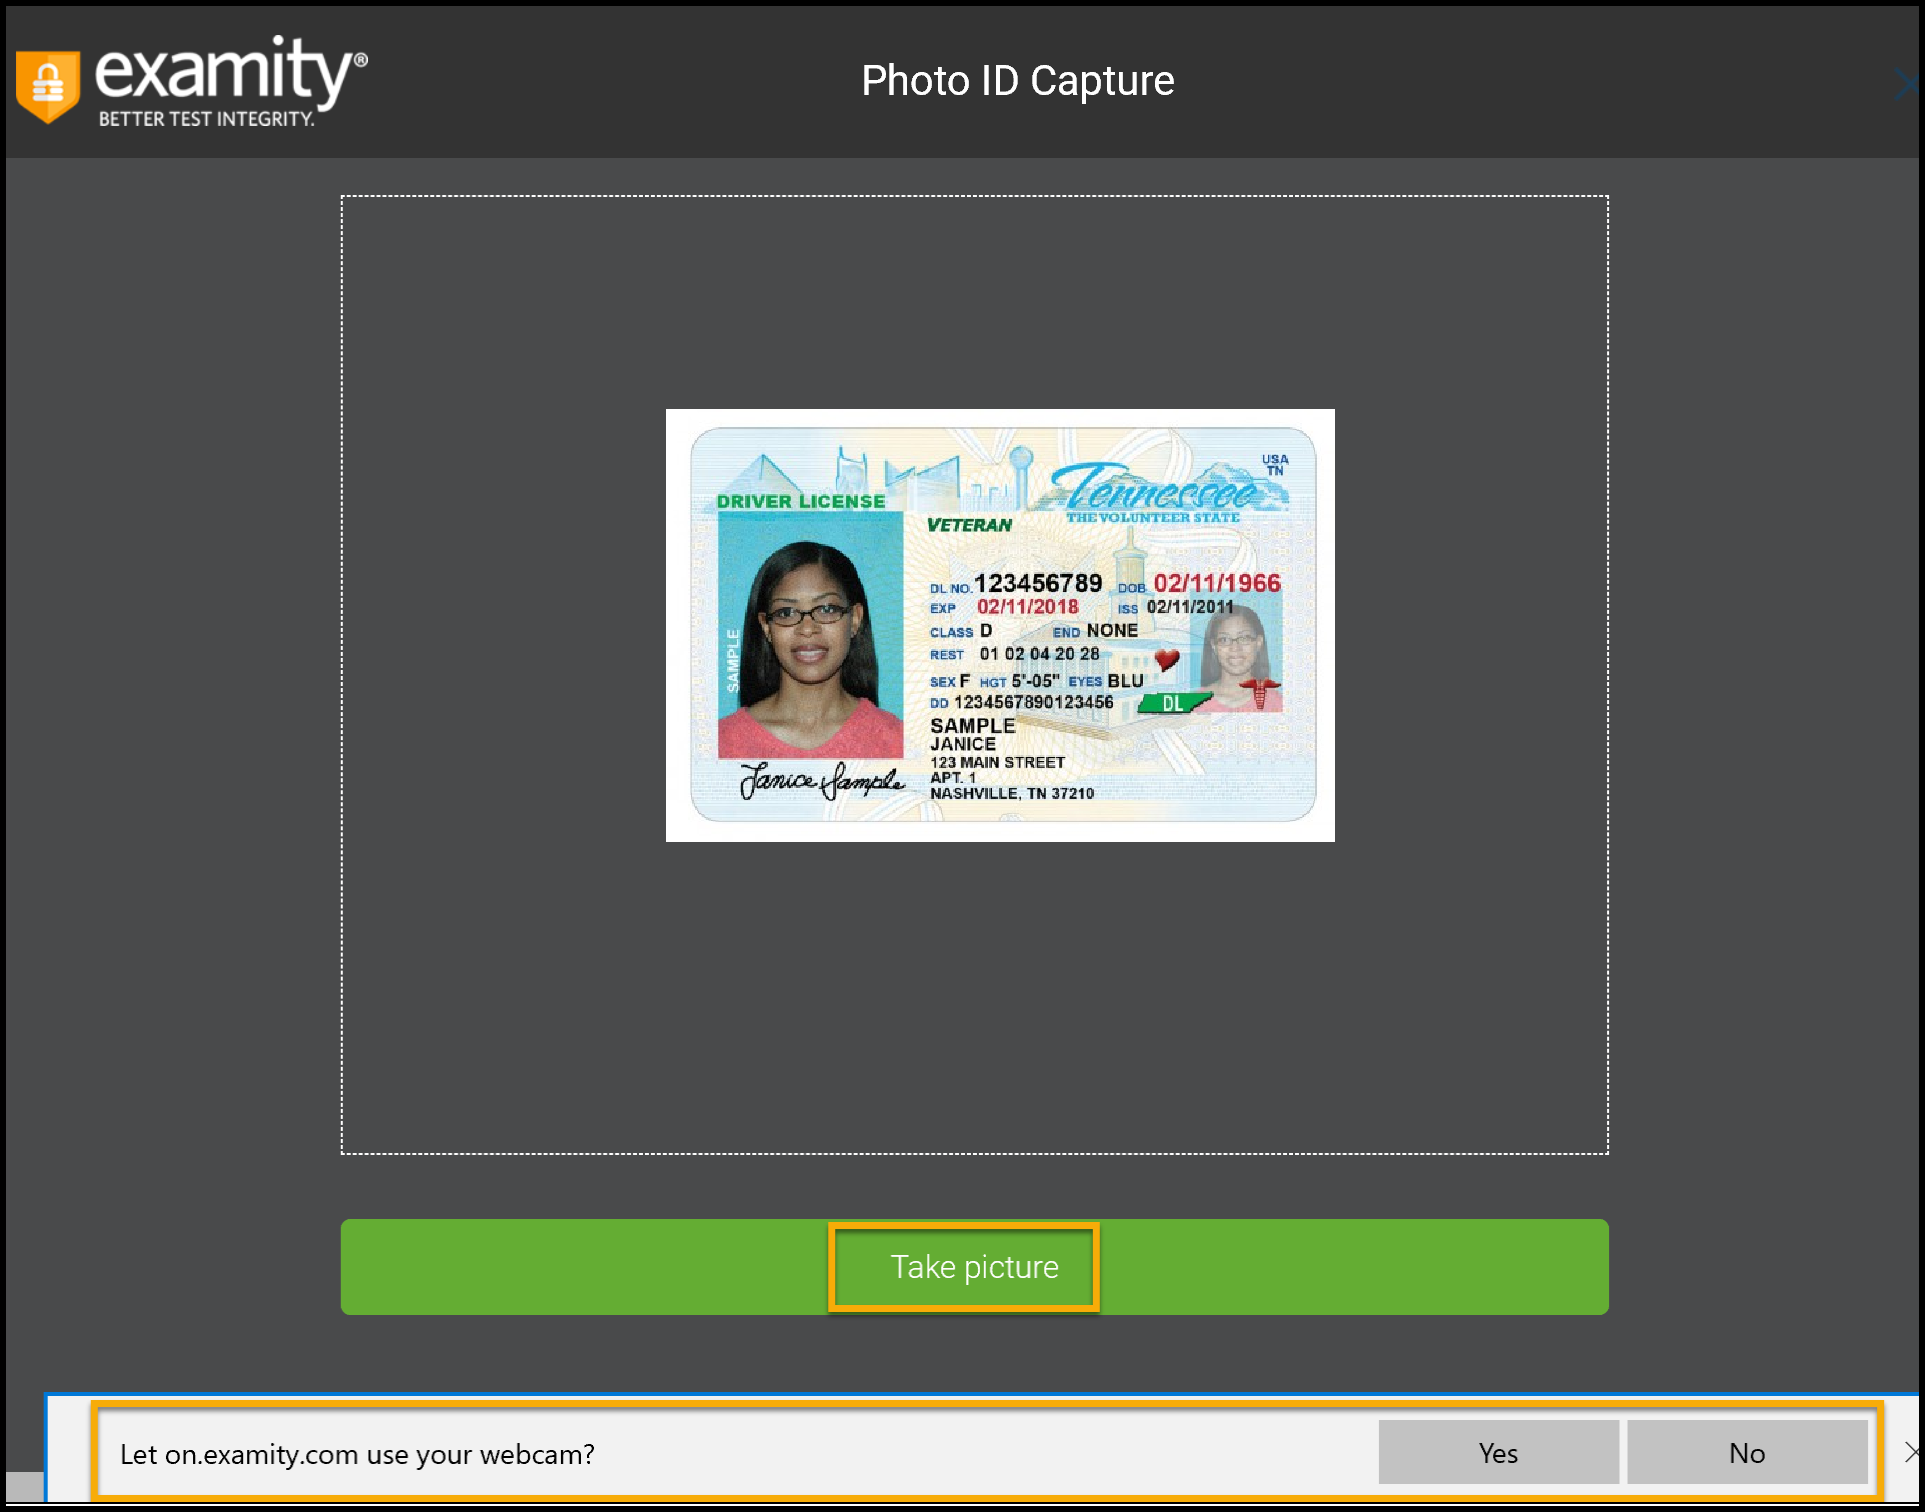 Photo ID Capture window open with sample ID image. Take picture and Let Examity use your webcam highlighted.